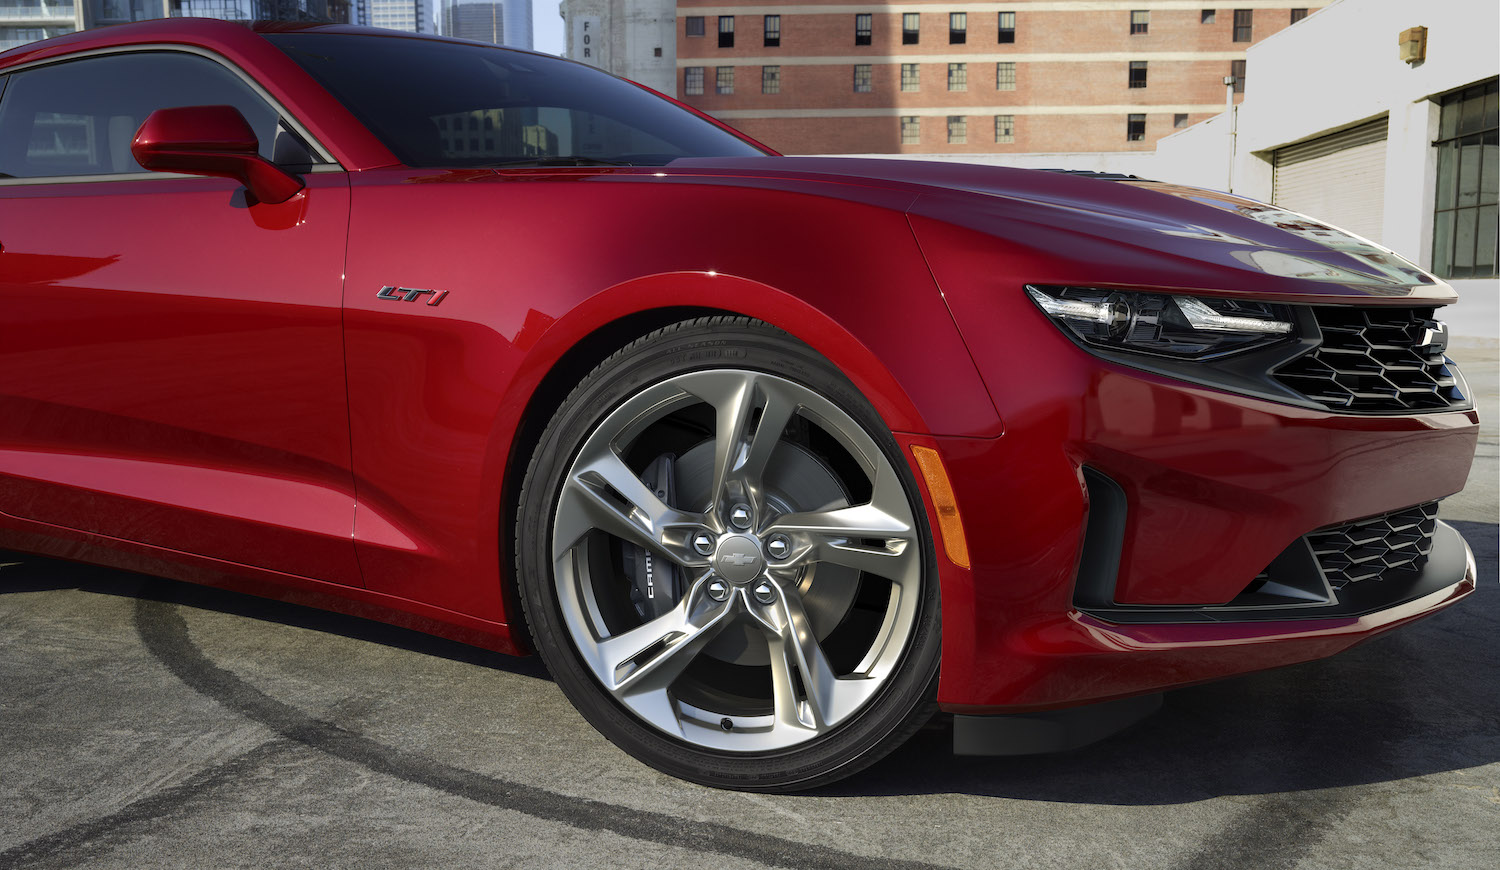 2020 Camaro To Feature Tire Fill Alert